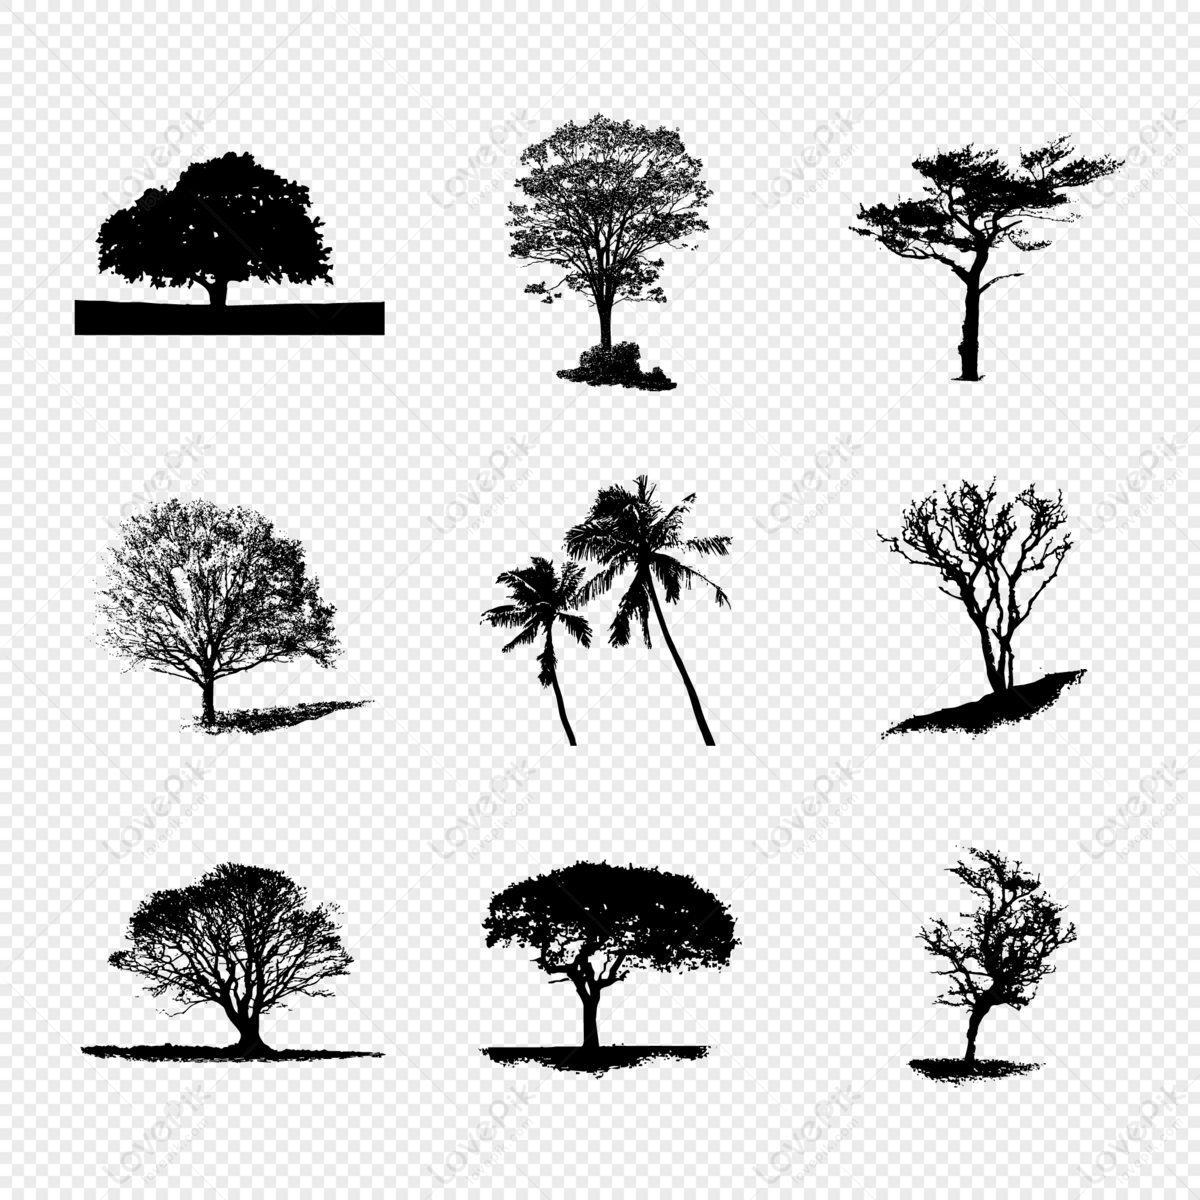 tree silhouette vector, tree, vector silhouette, night tree png hd transparent image